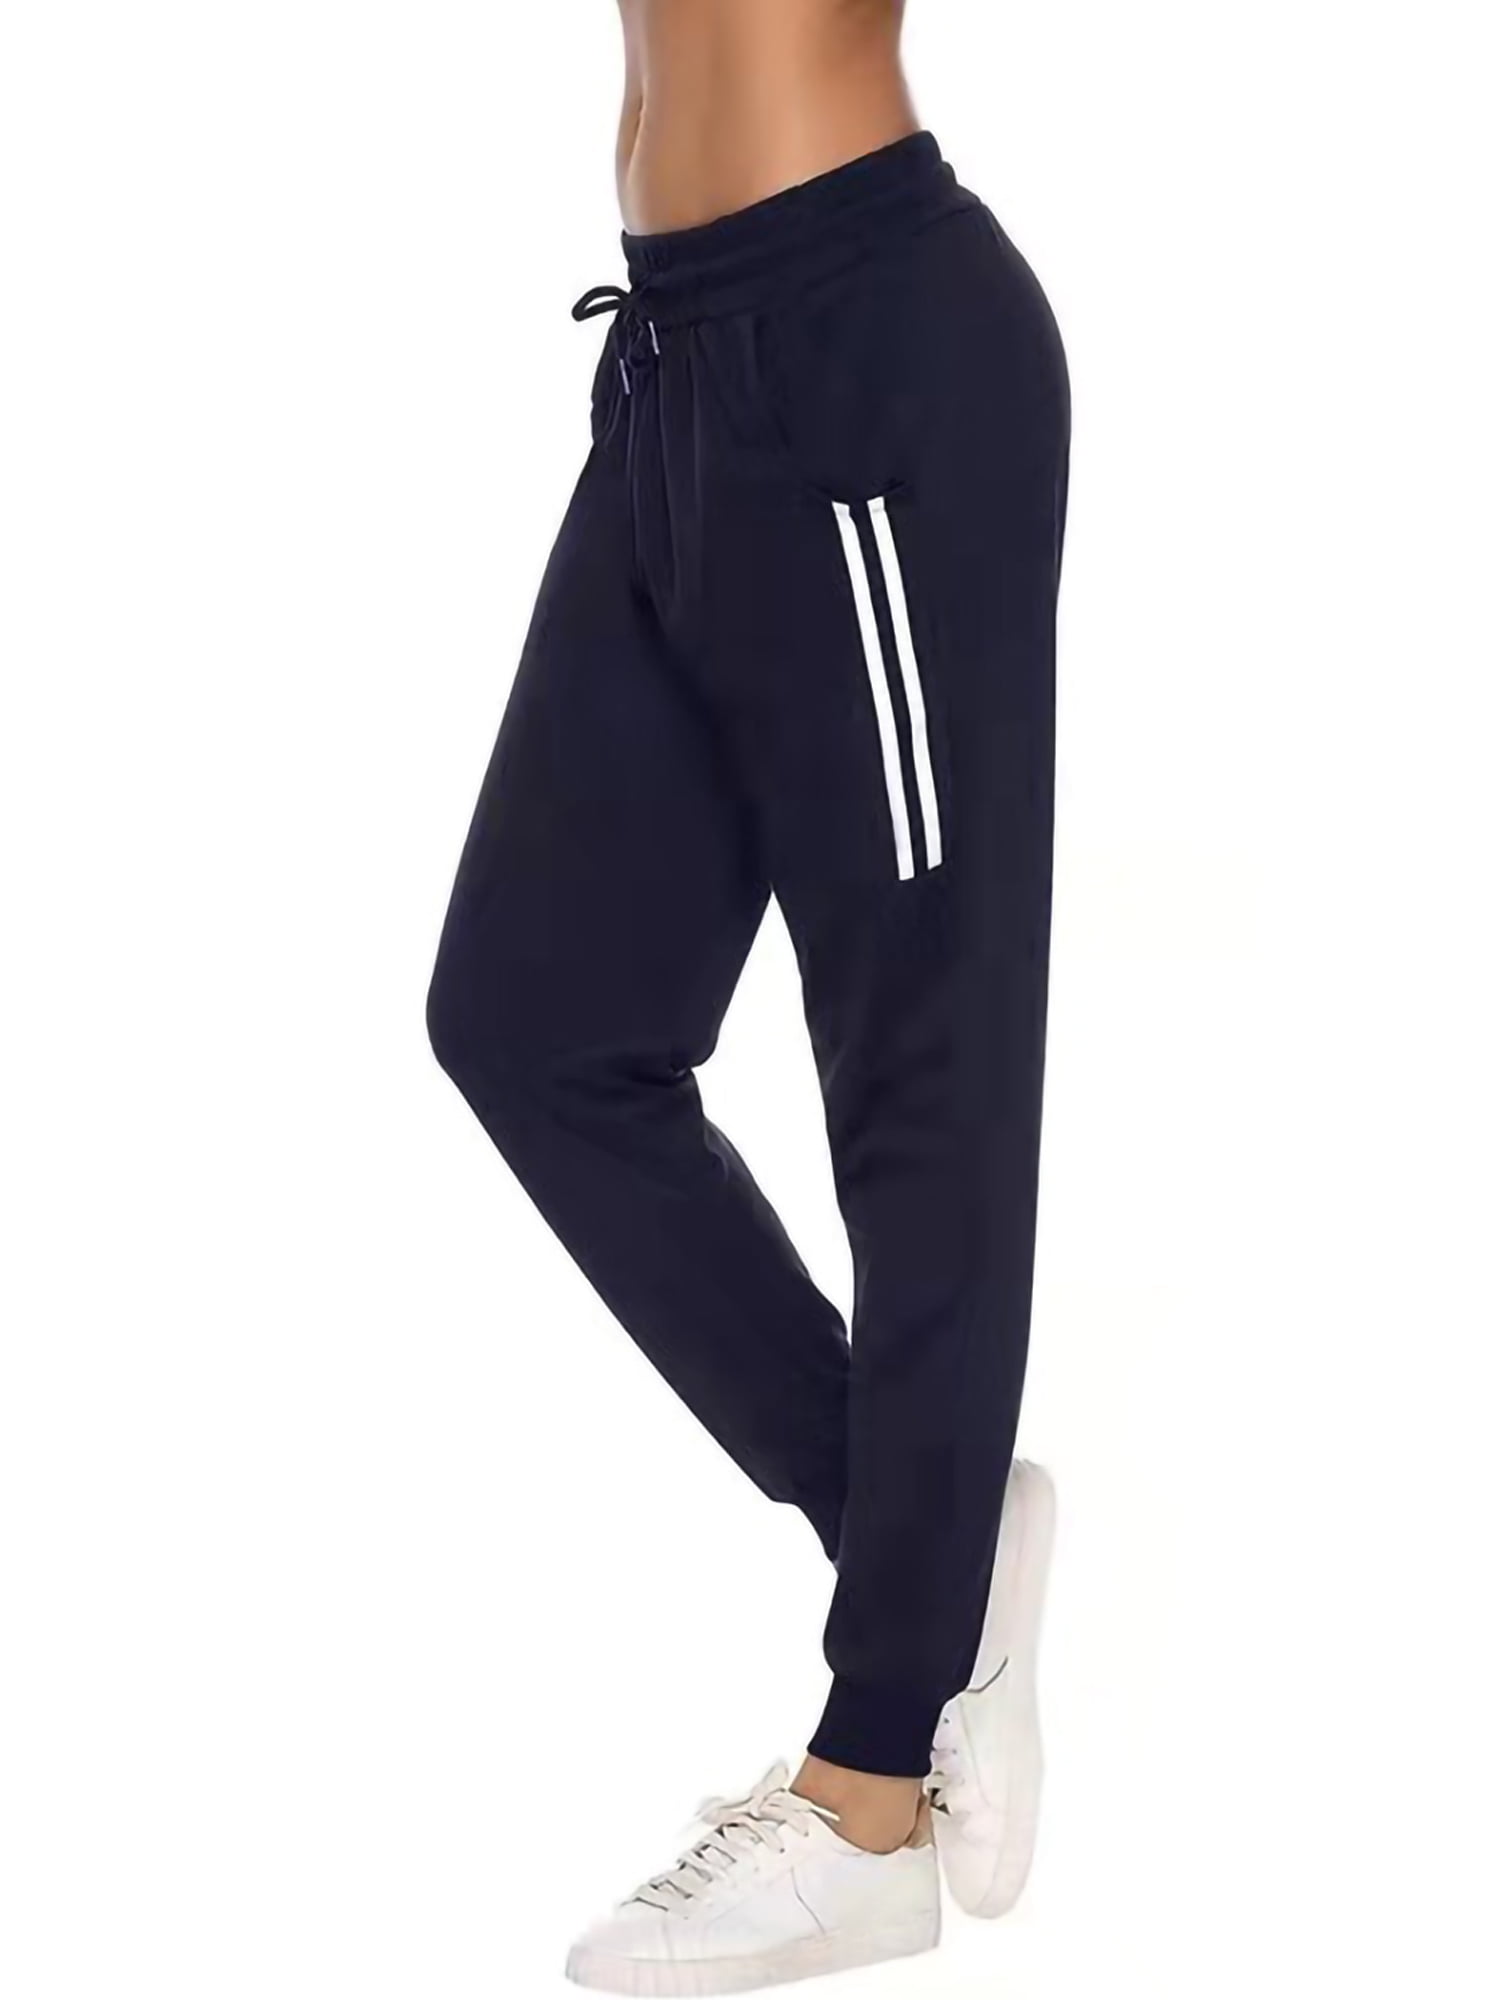 Hawiton Womens Athletic Casual Sports Trousers,Tapered Leg 2-Stripe Training Sweat Track Pants Jogger Bottoms 